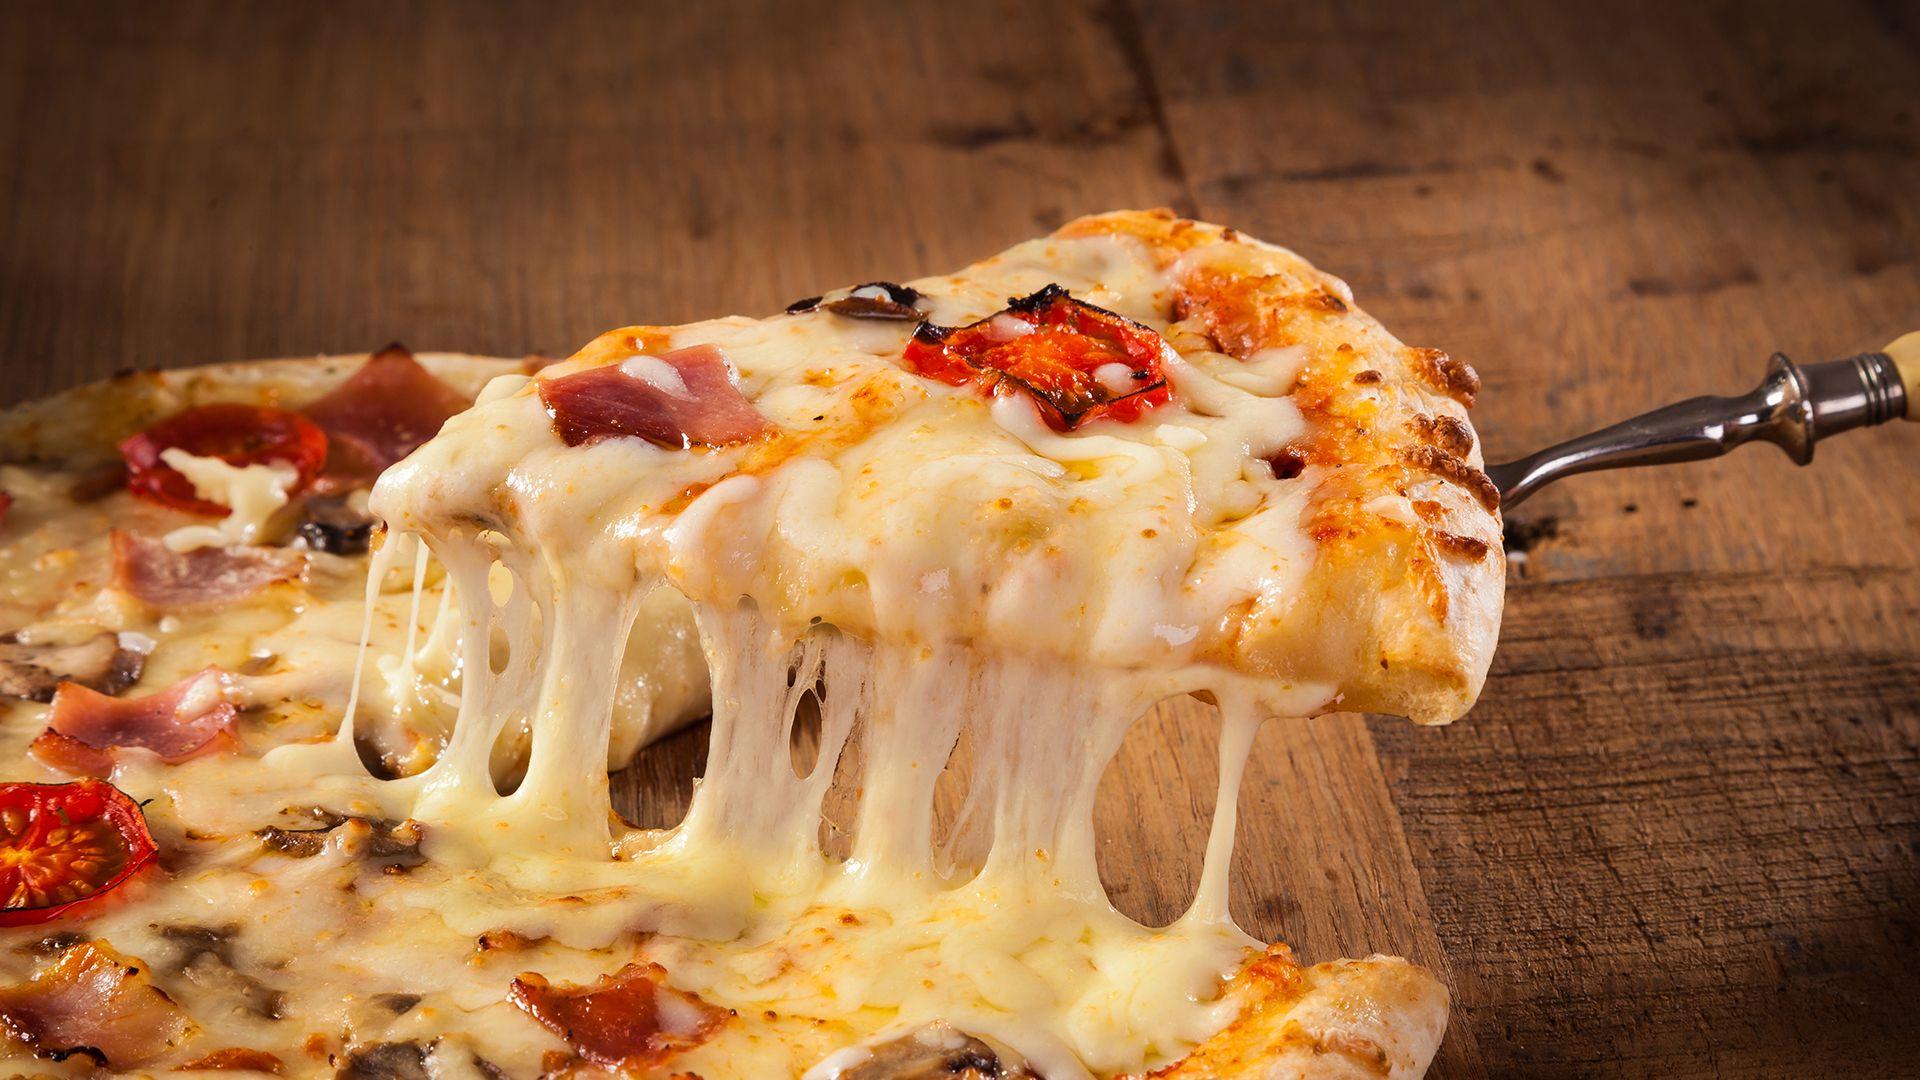 Looking for deals on National Pizza Day? It's as easy as pie